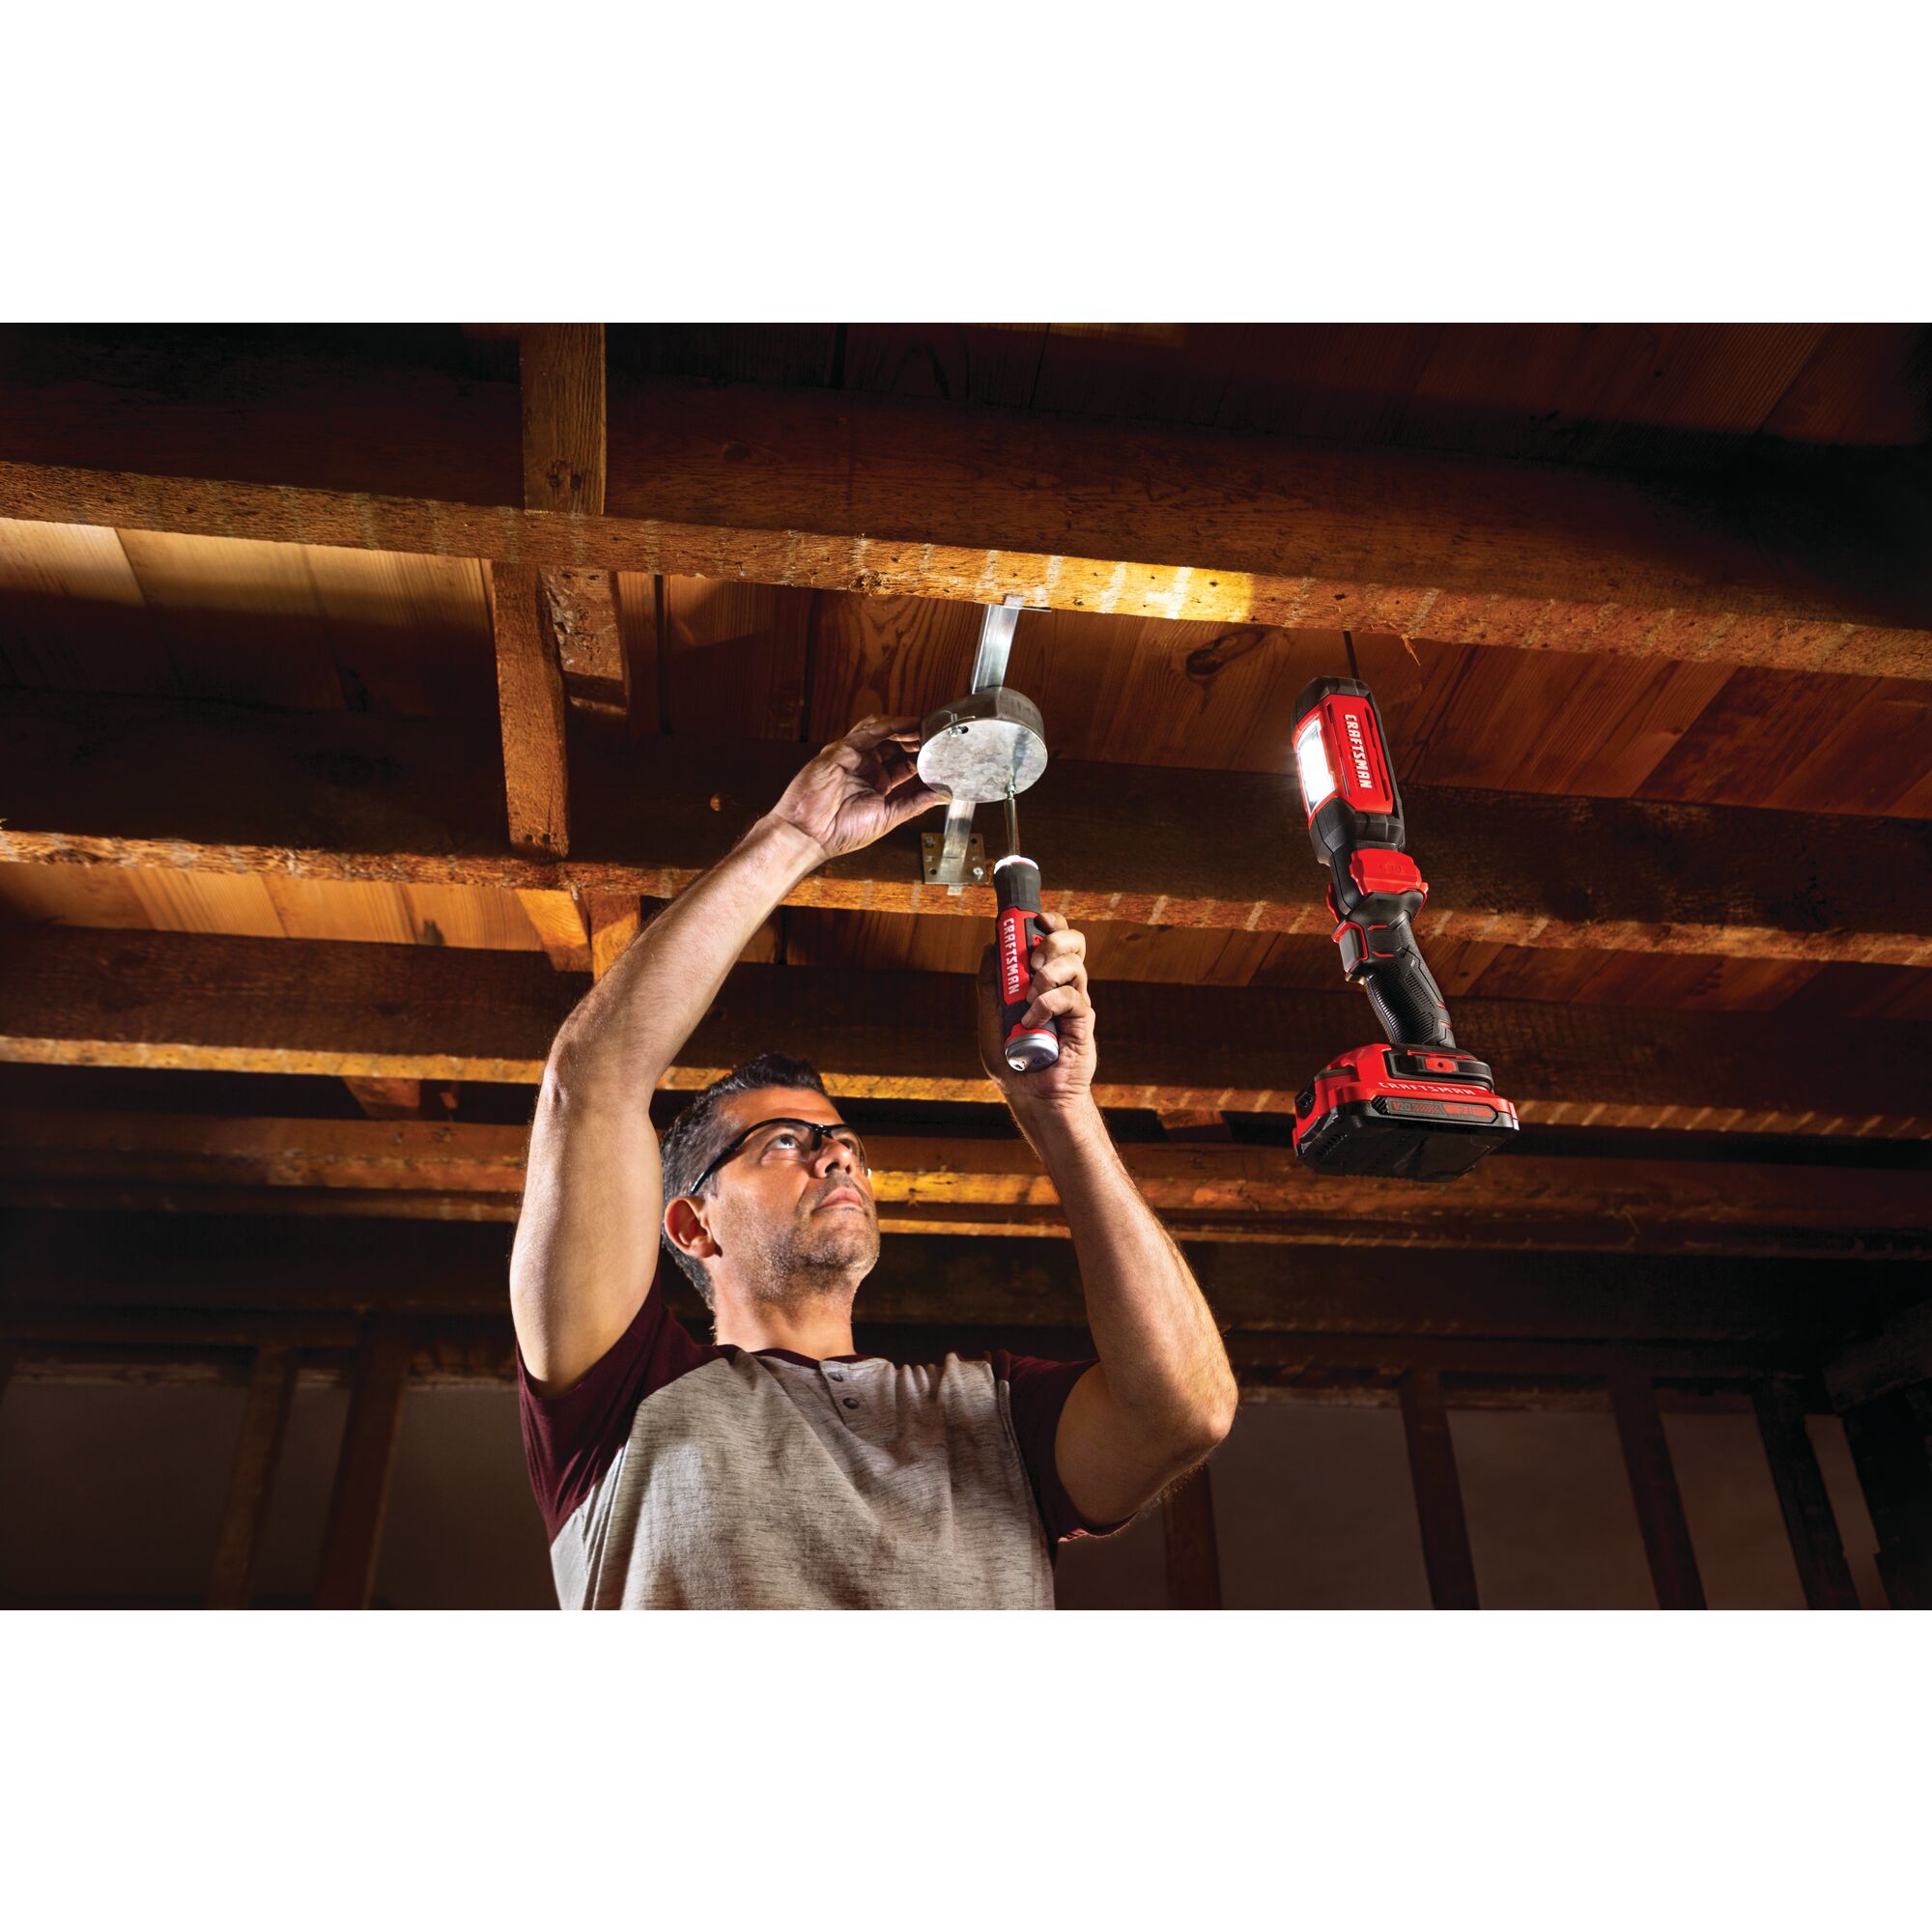 Cordless led hanging work light tool only being used for fixing things.